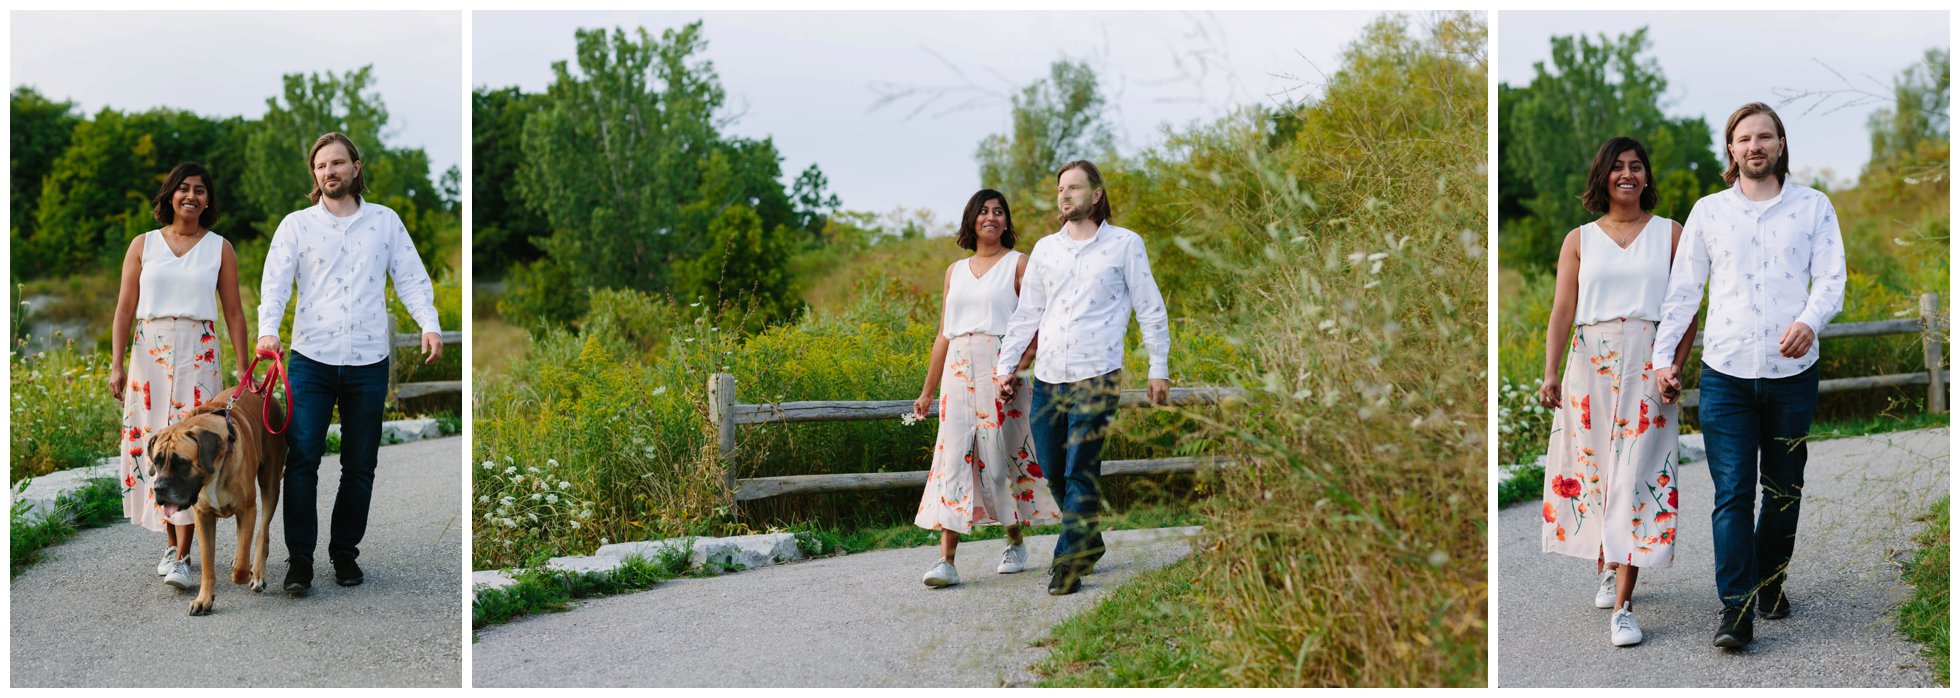 Toronto Engagement Session - Krzysztof and Dee (Life by Selena Photography)_0007.jpg